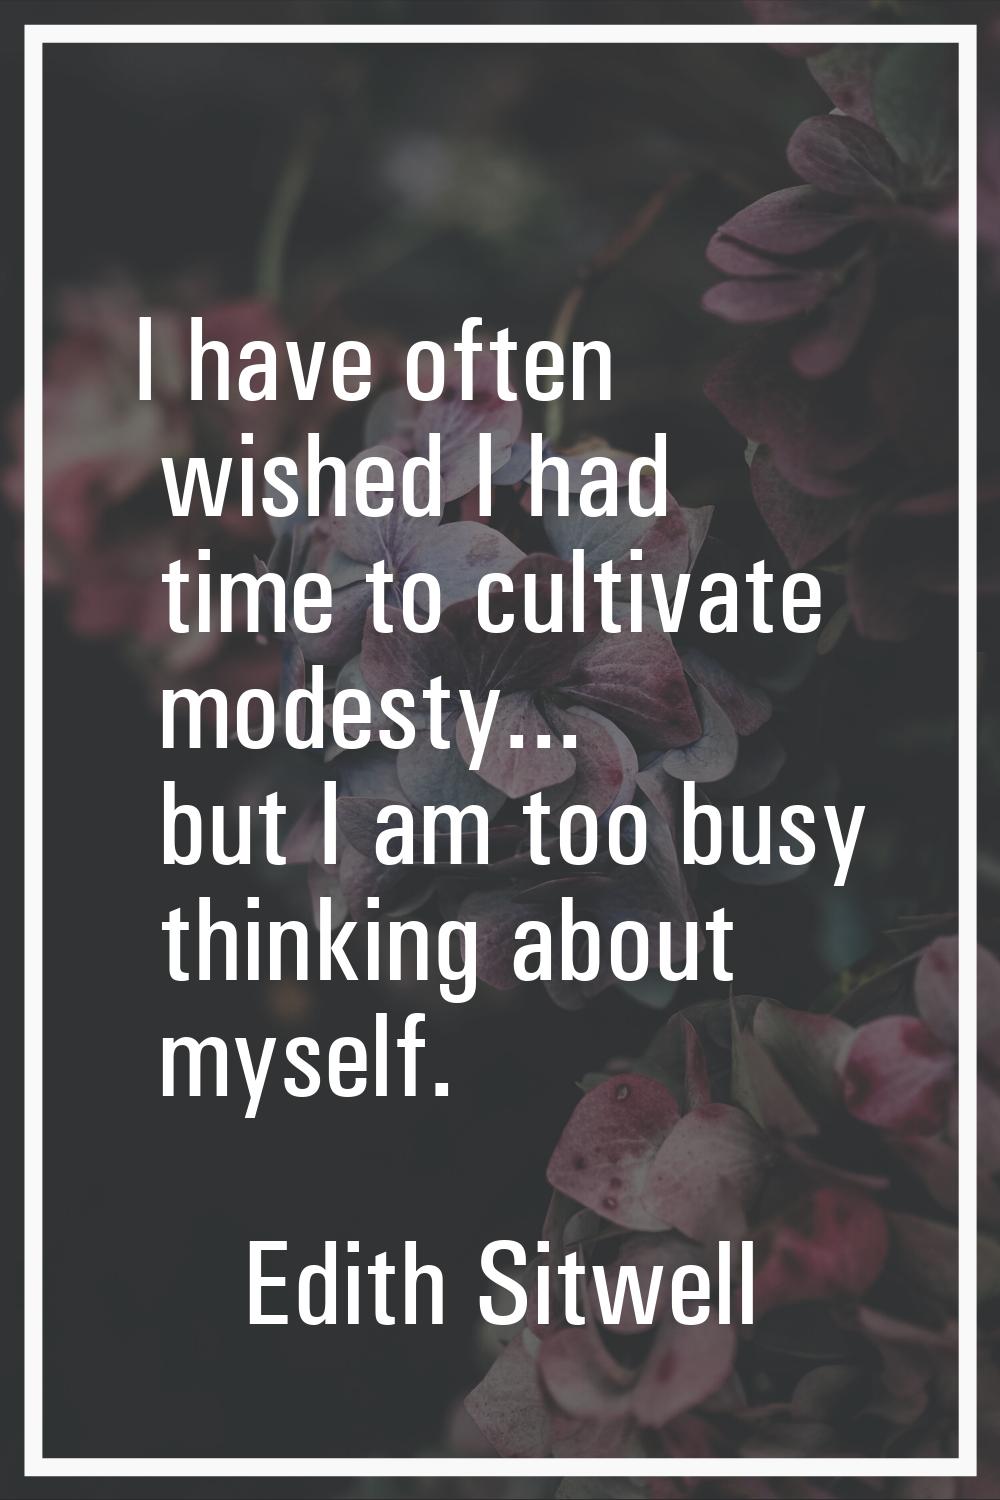 I have often wished I had time to cultivate modesty... but I am too busy thinking about myself.